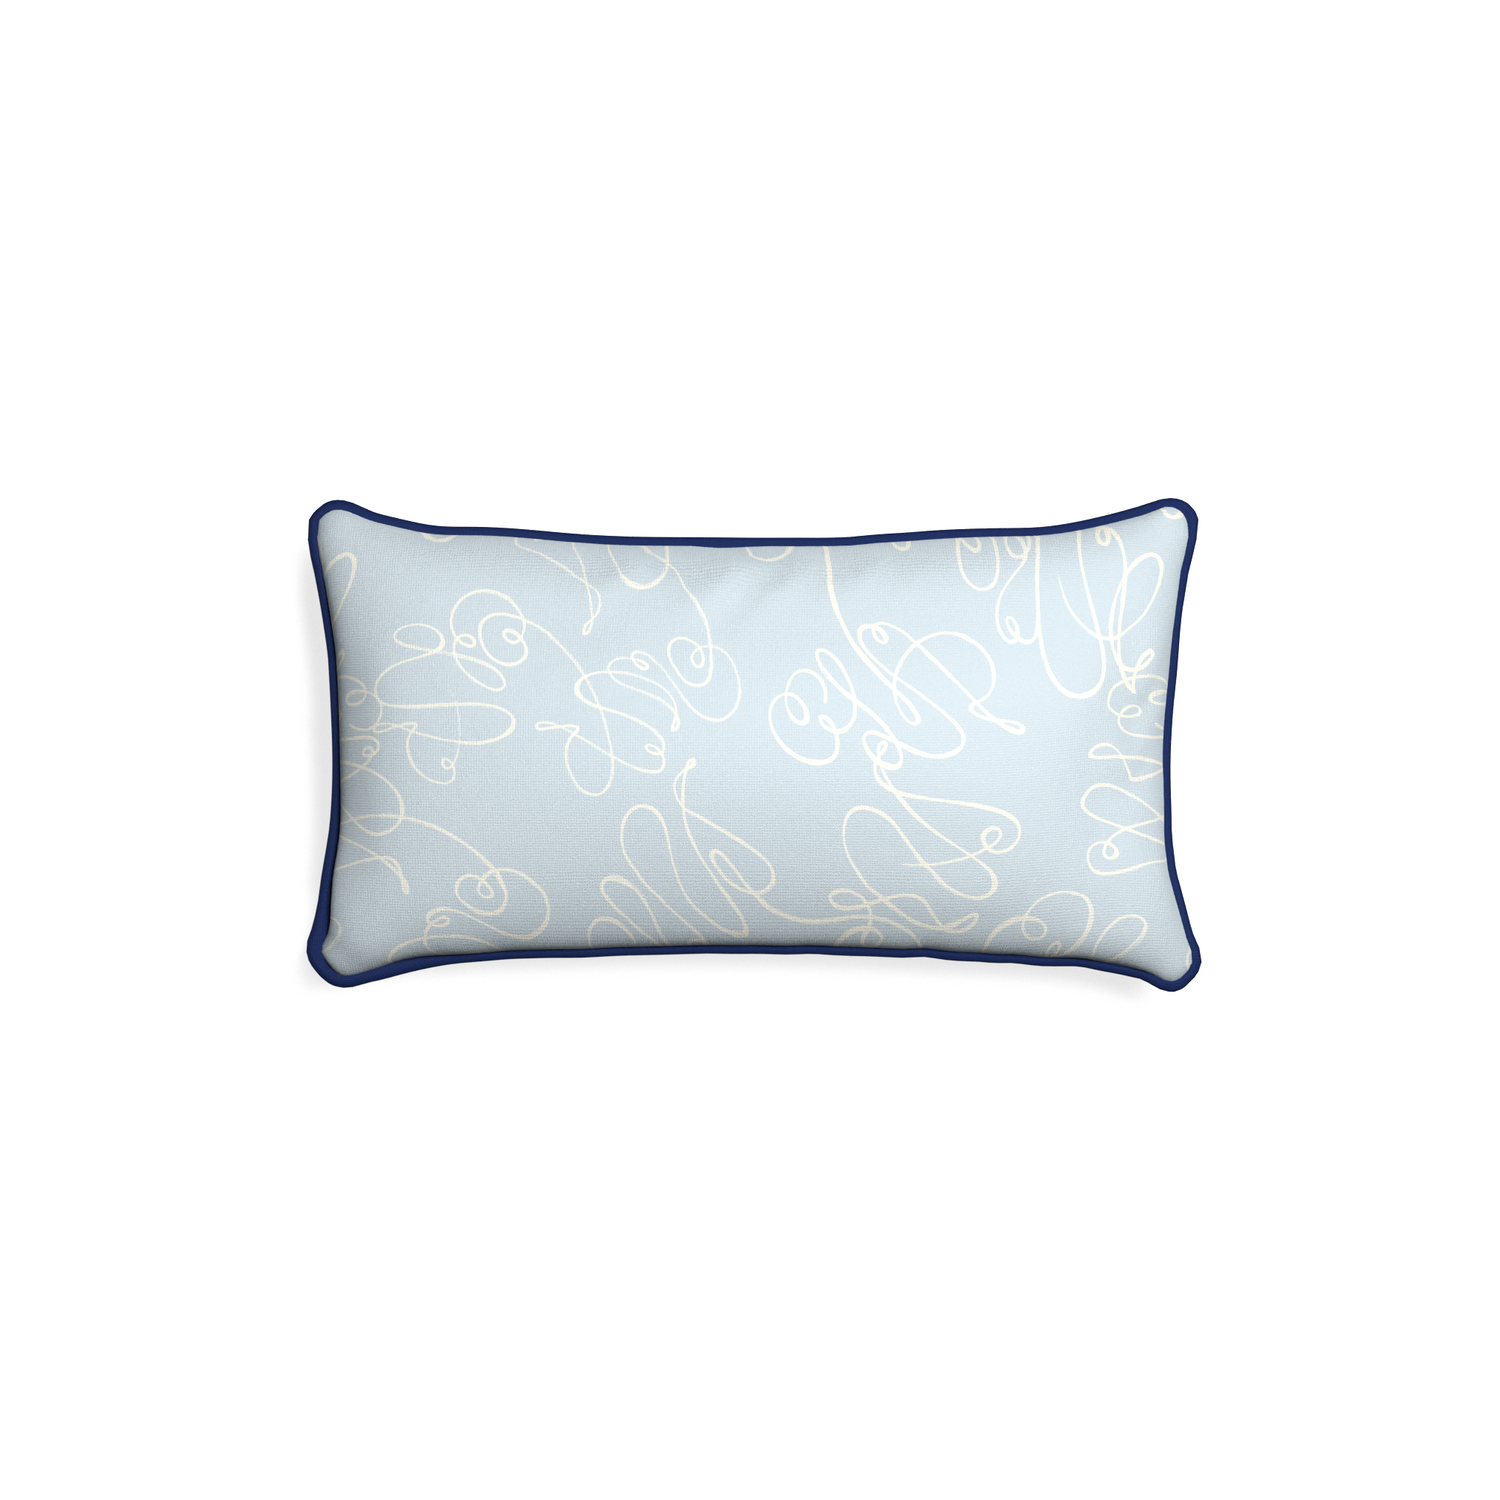 Petite-lumbar mirabella custom powder blue abstractpillow with midnight piping on white background